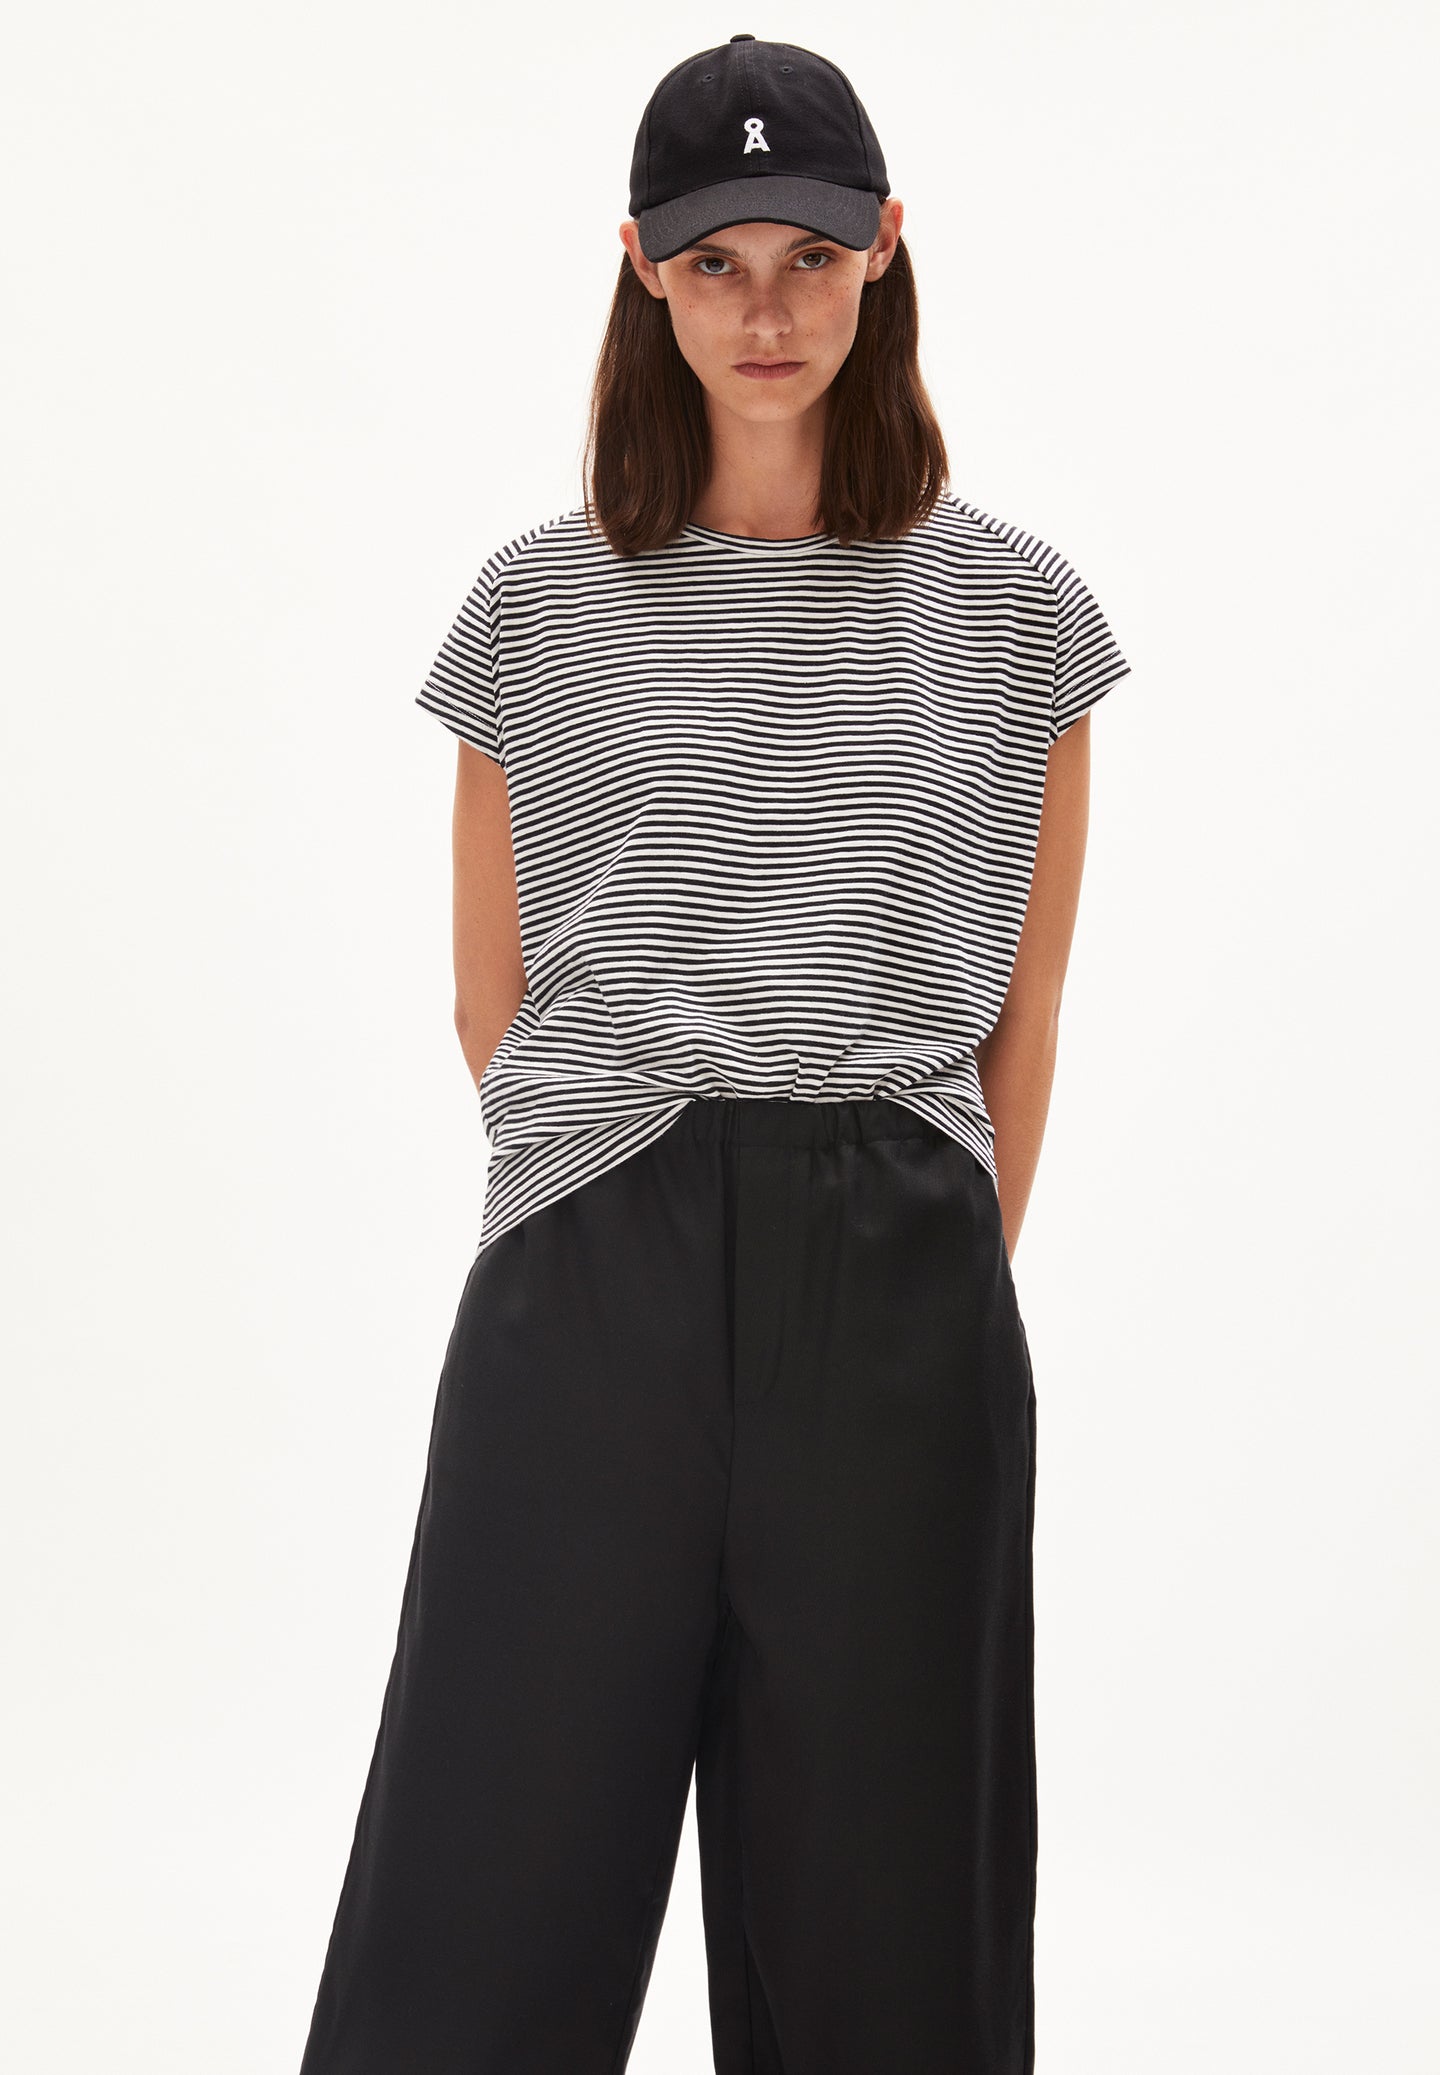 Loose fit striped t-shirt from Armedangels, with cap sleeves and a round neck, fine horizontal stripes in oat milk white and black, made from sustainable organic cotton.